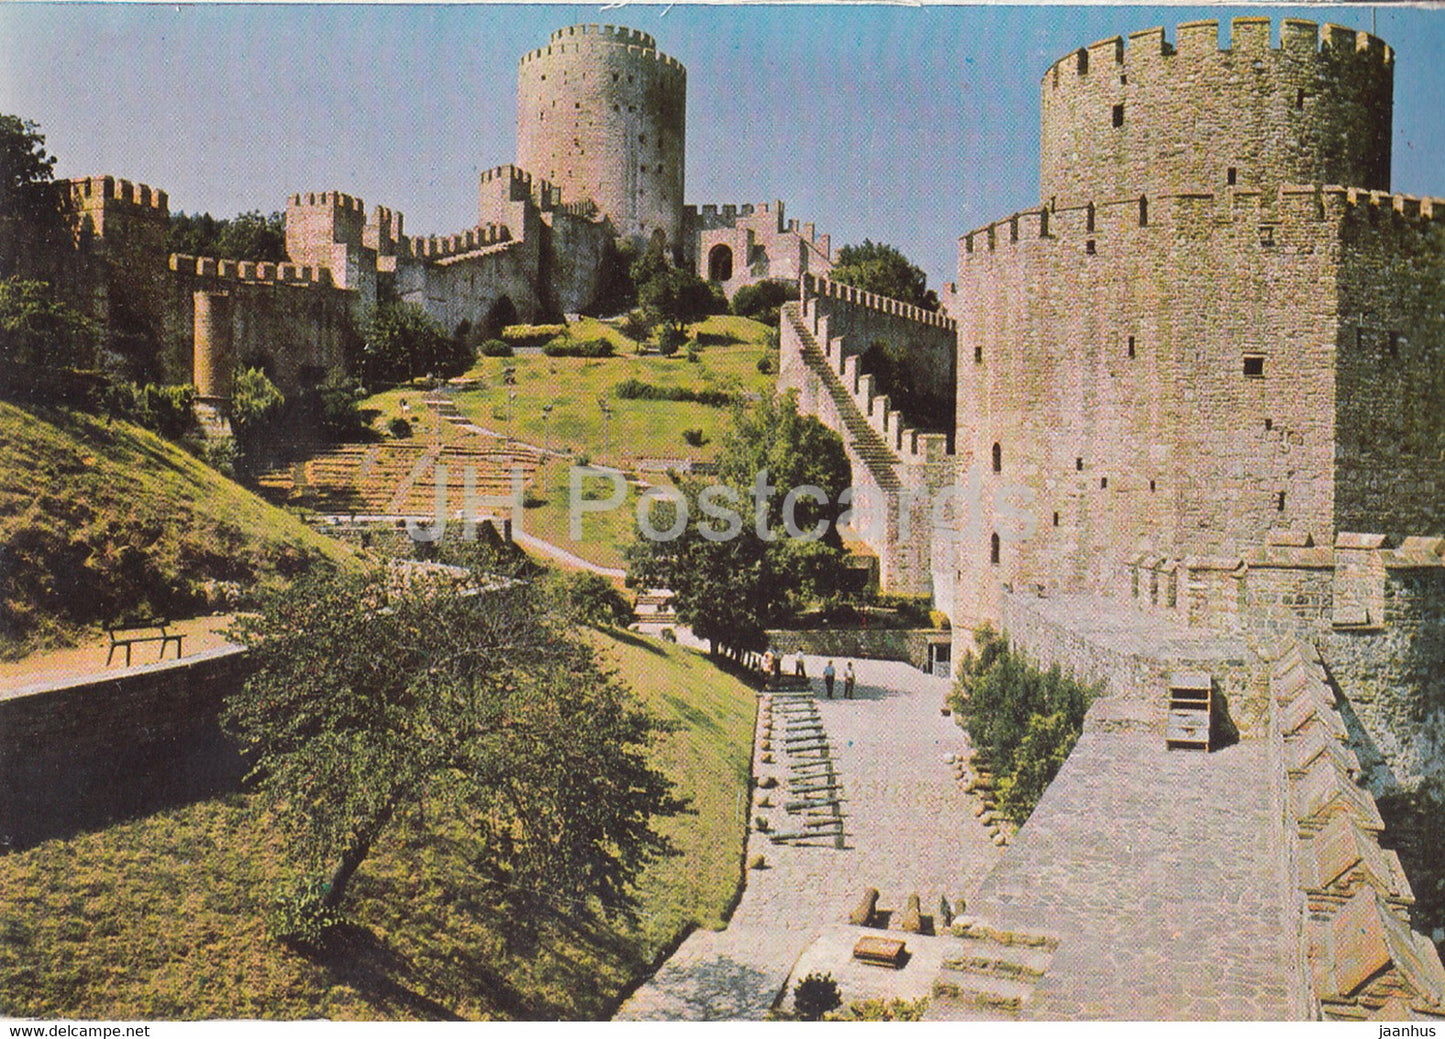 Istanbul - The Fortress and the Bospherus - Turkey - unused - JH Postcards